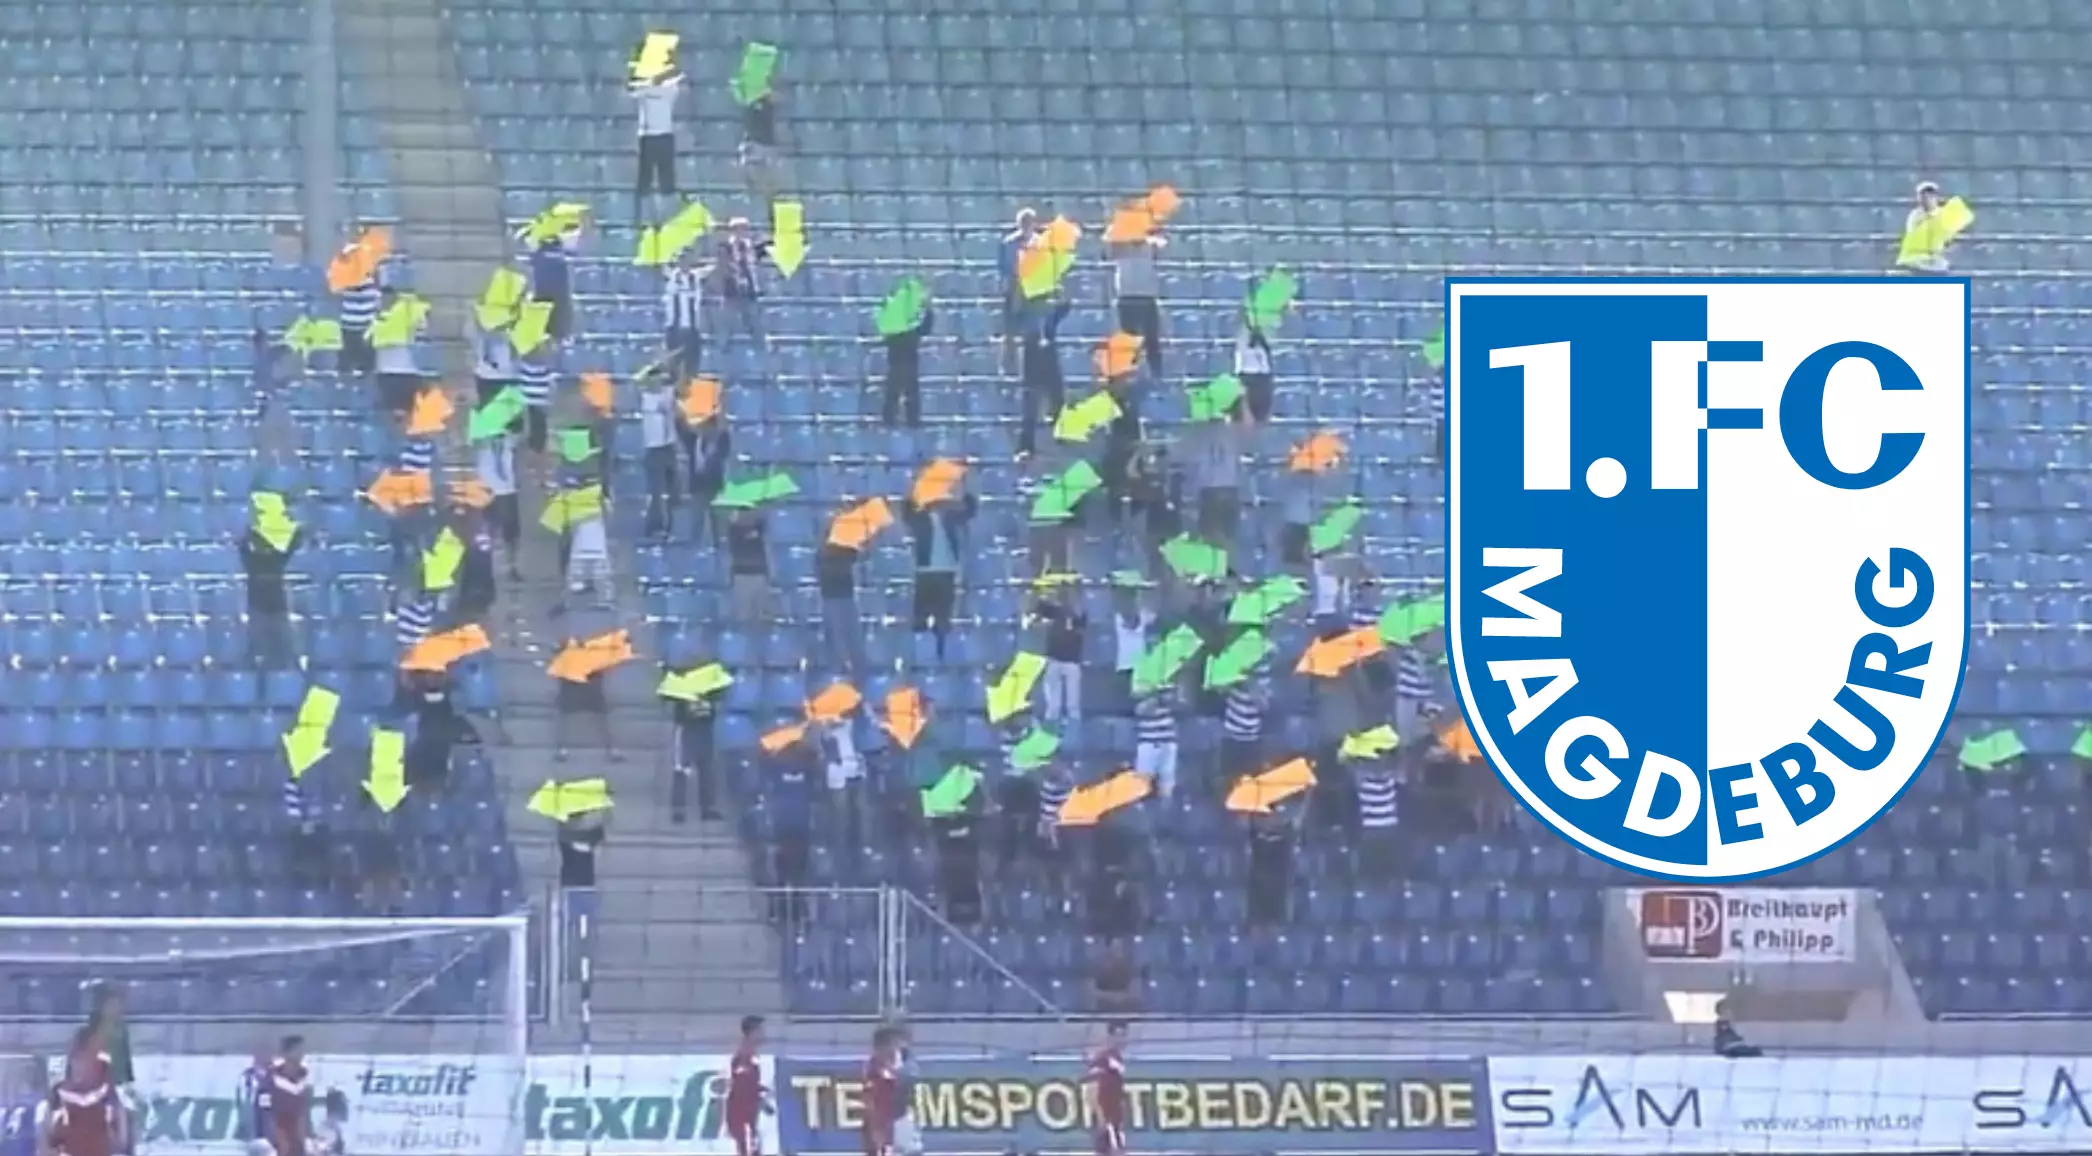 When Magdeburg Fans Produced The Ultimate Insult Against Their Own Team